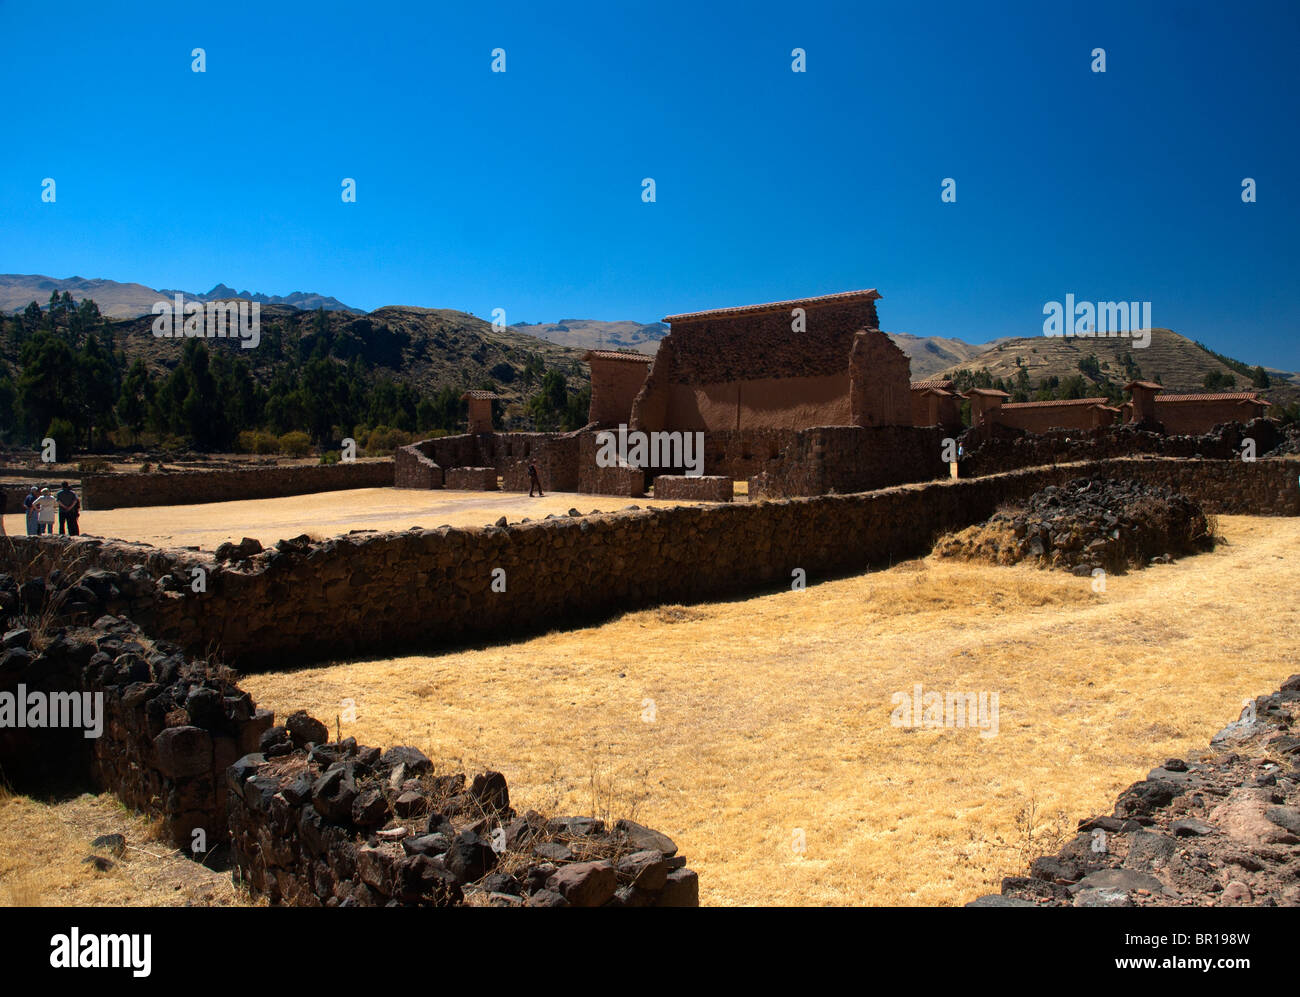 Inca ruins at the old Temple of Viracocha, Raqchi, on the road between Cusco and Puno, Peru. Stock Photo